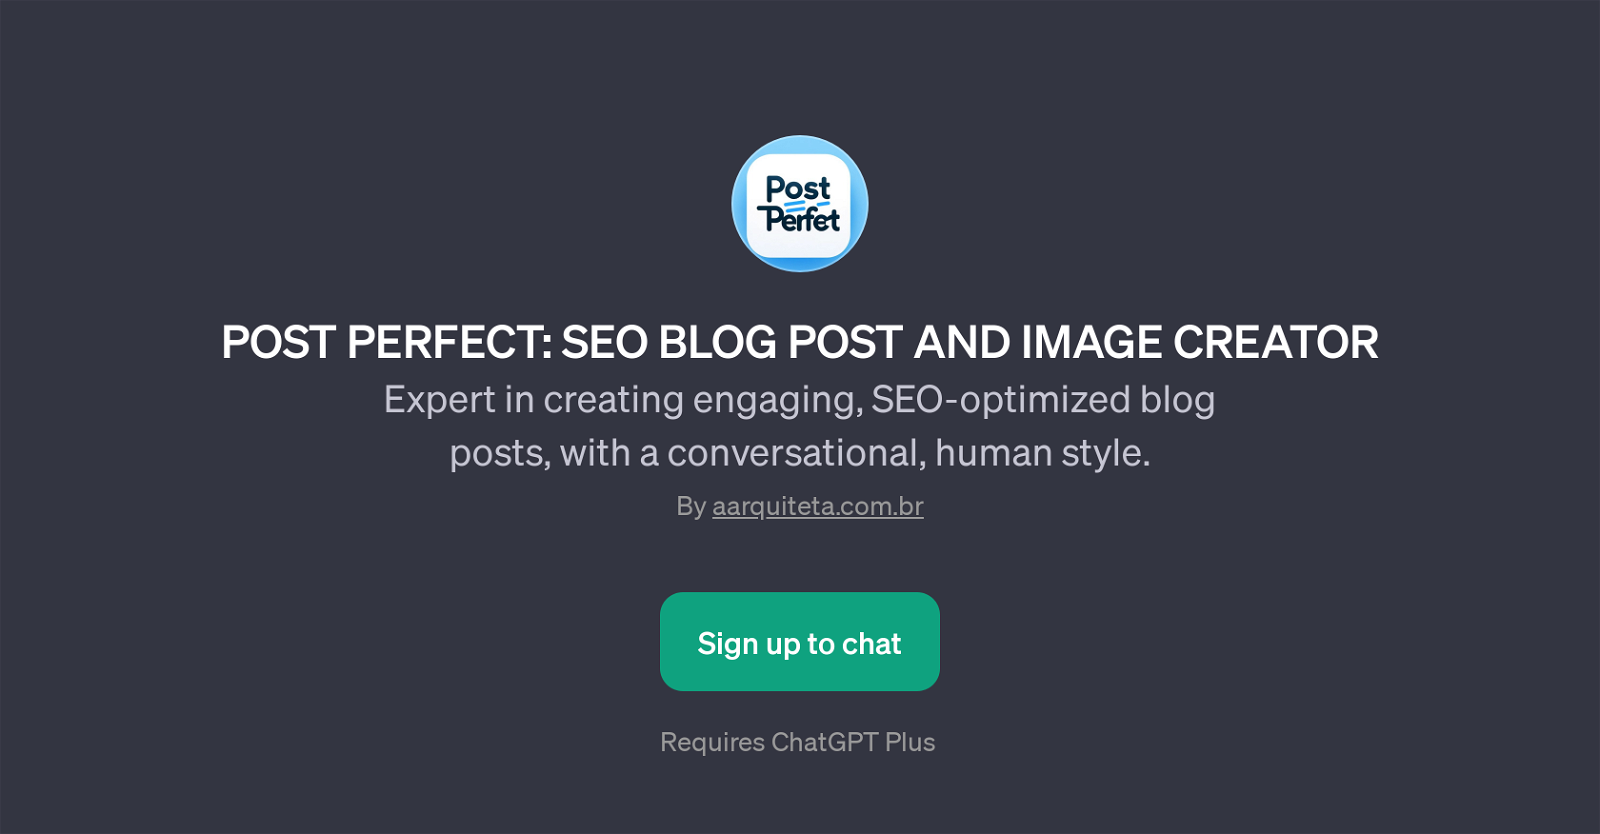 POST PERFECT: SEO BLOG POST AND IMAGE CREATOR website